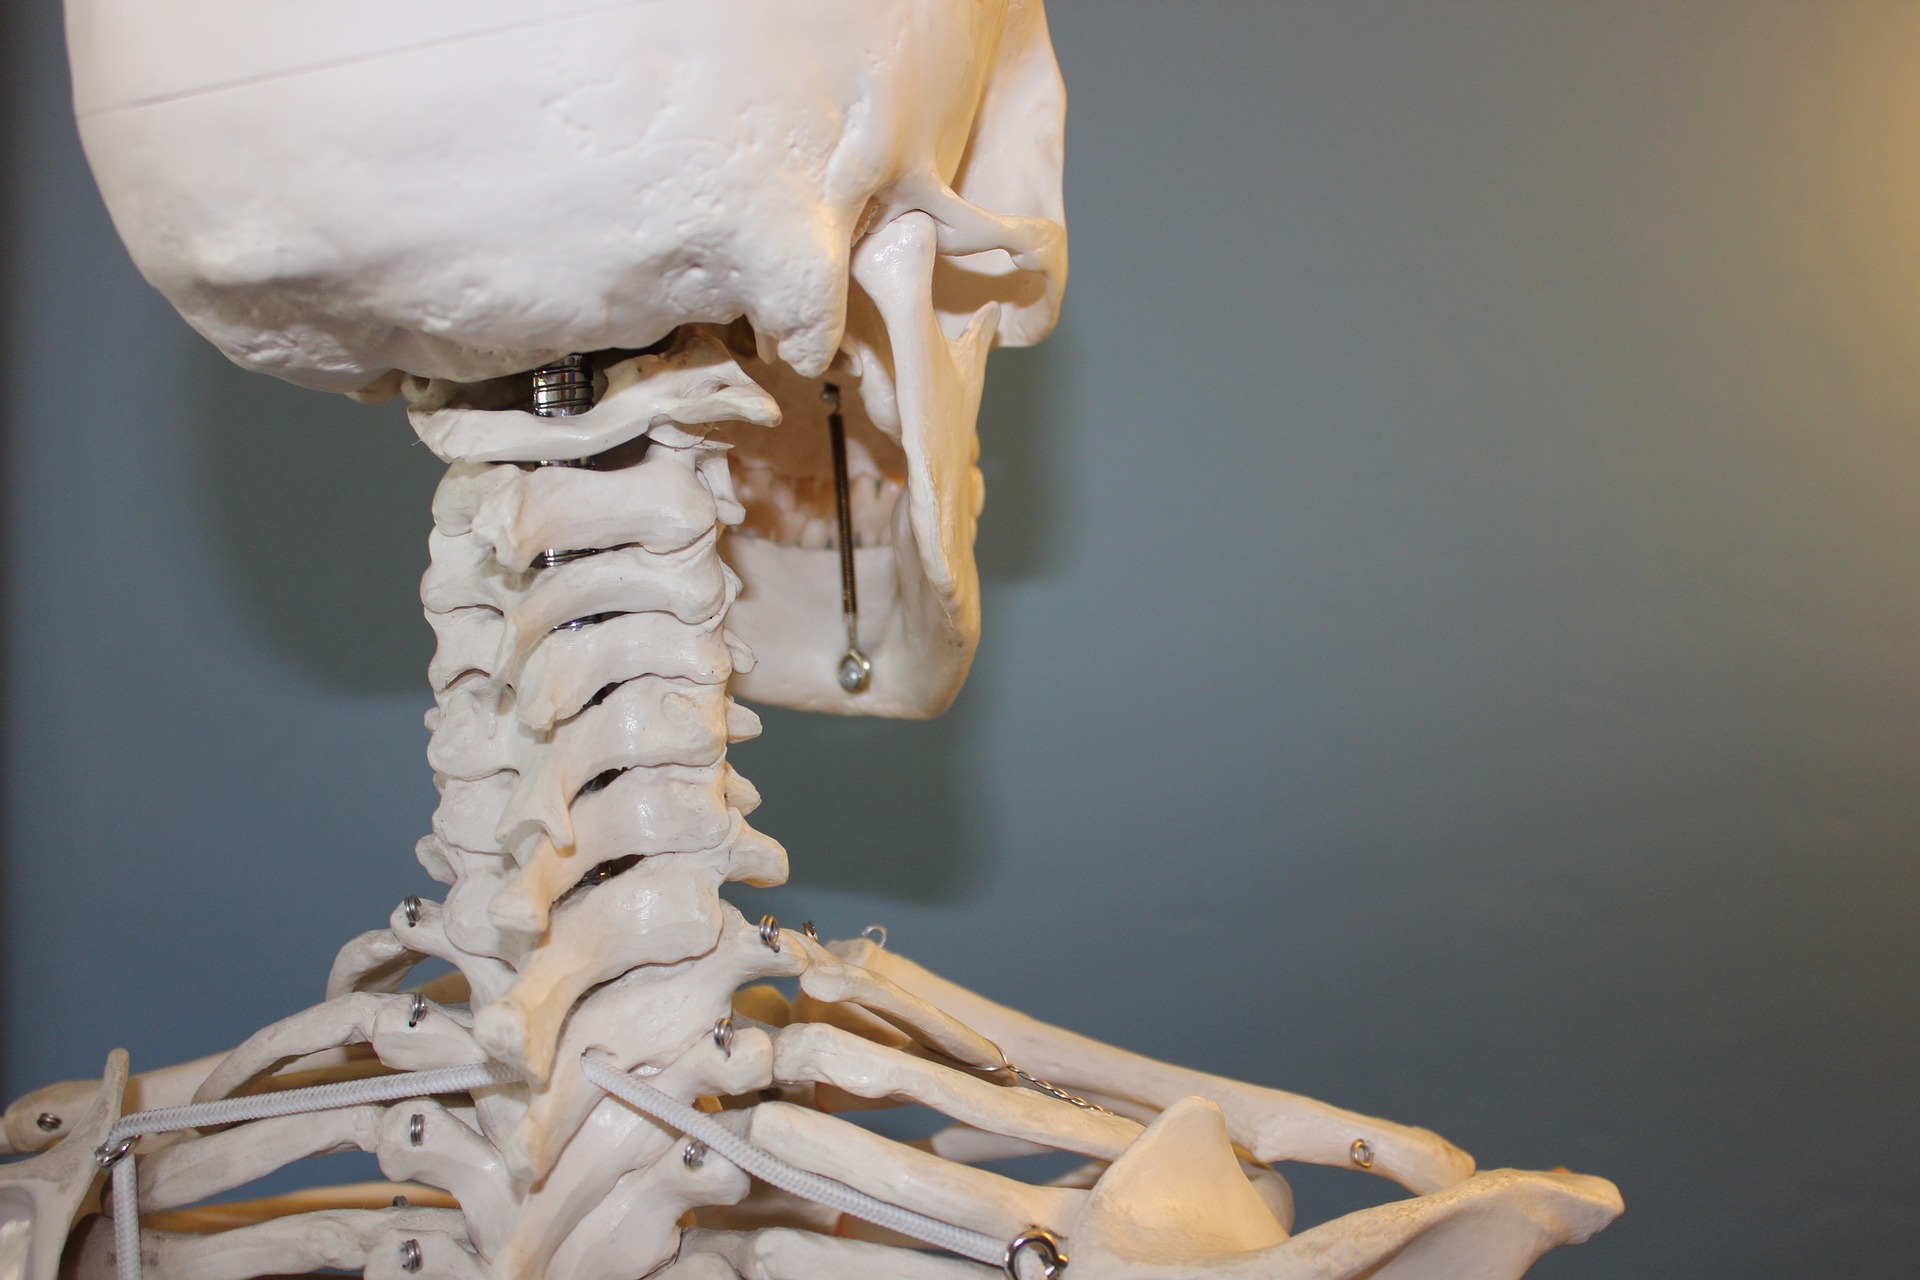 A close-up of a model skeleton's spine and base of skull.